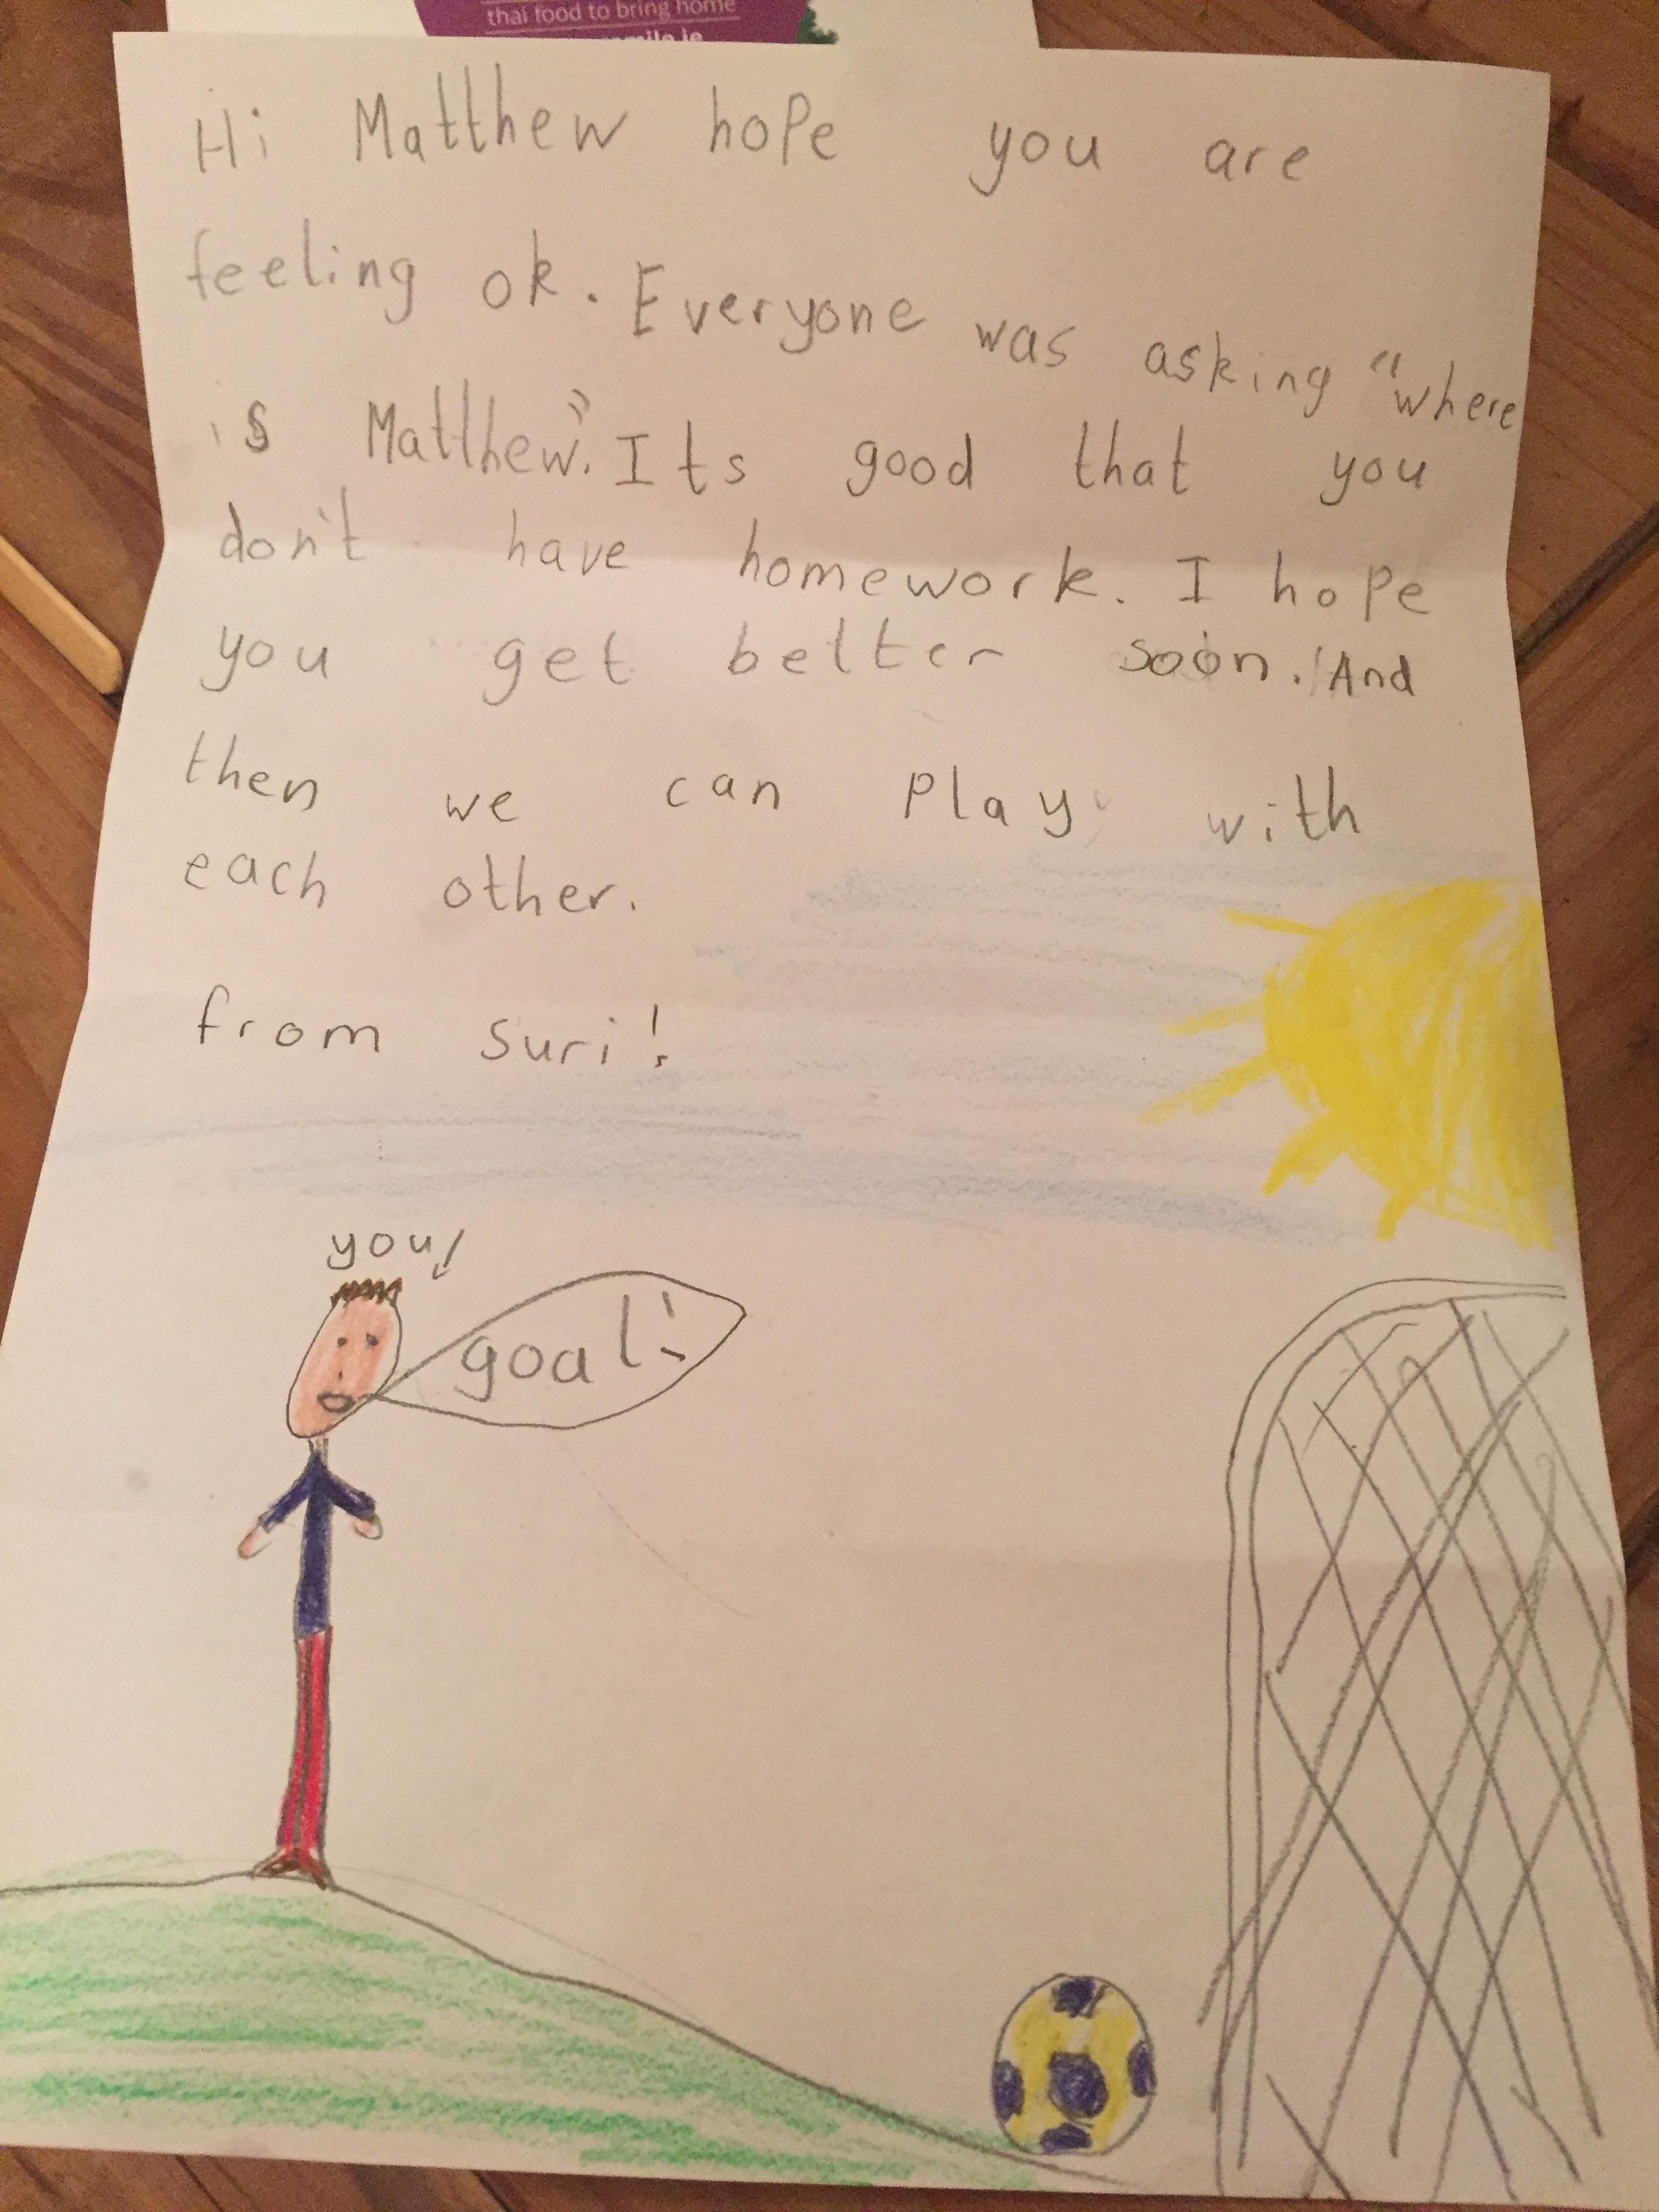 My 7 year old brother's friend from school sent him this while he was sick